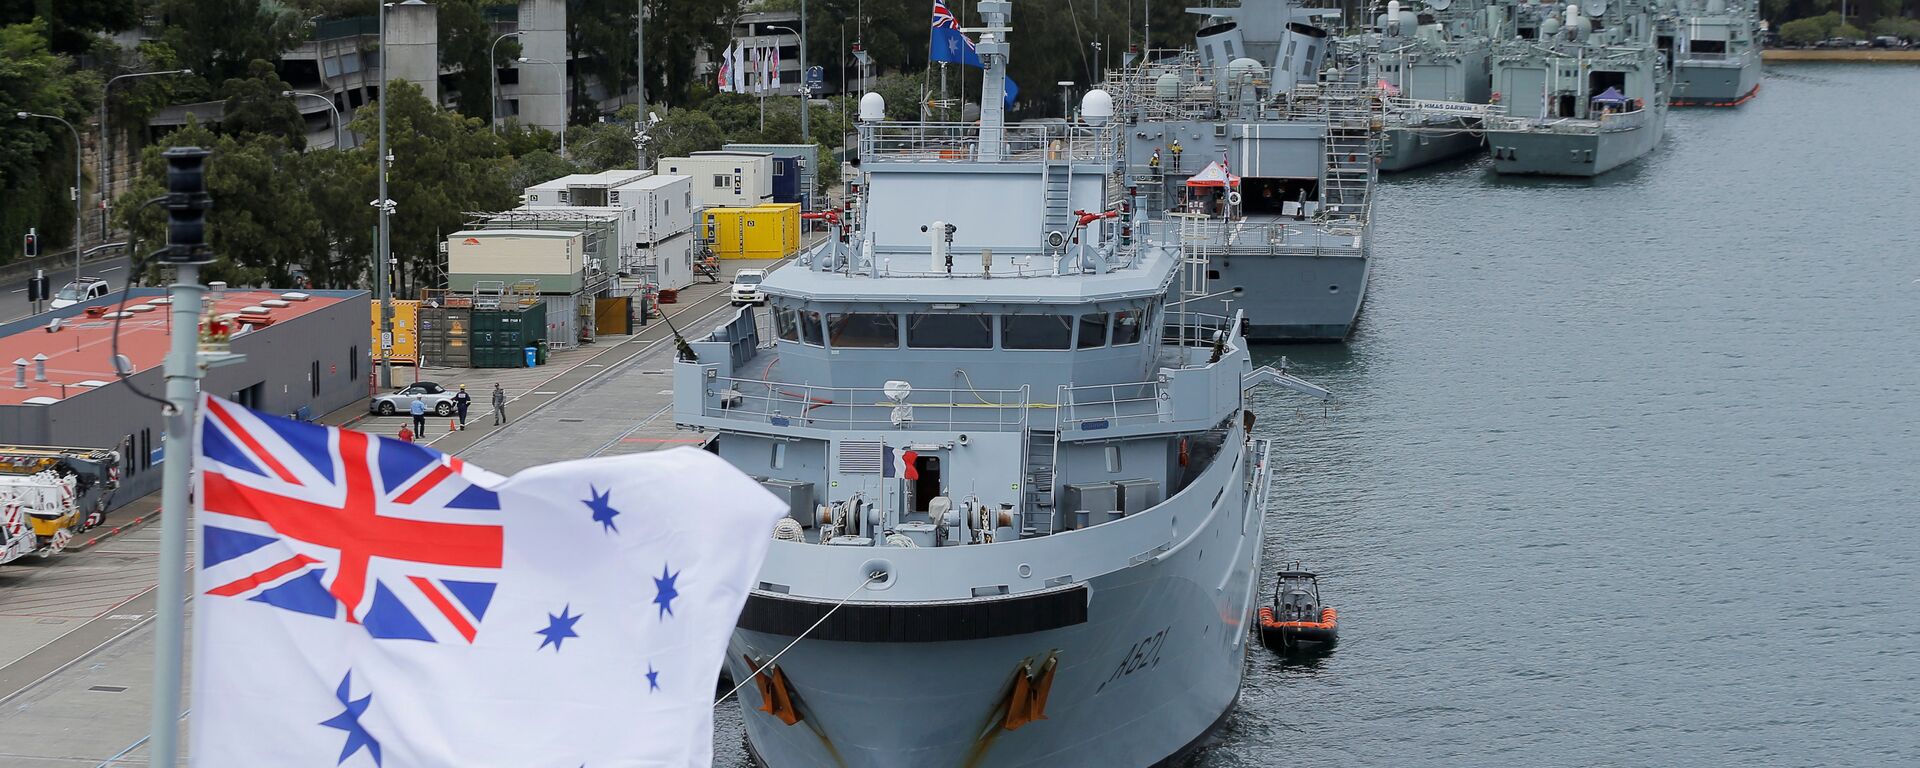 Australian Naval vessels are pictured from the deck of HMAS Adelaide during a visit by French Defence Minister Jean-Yves Le Drian and Australian Defence Minister Marise Payne in Sydney, December 19, 2016. - Sputnik Việt Nam, 1920, 19.04.2018